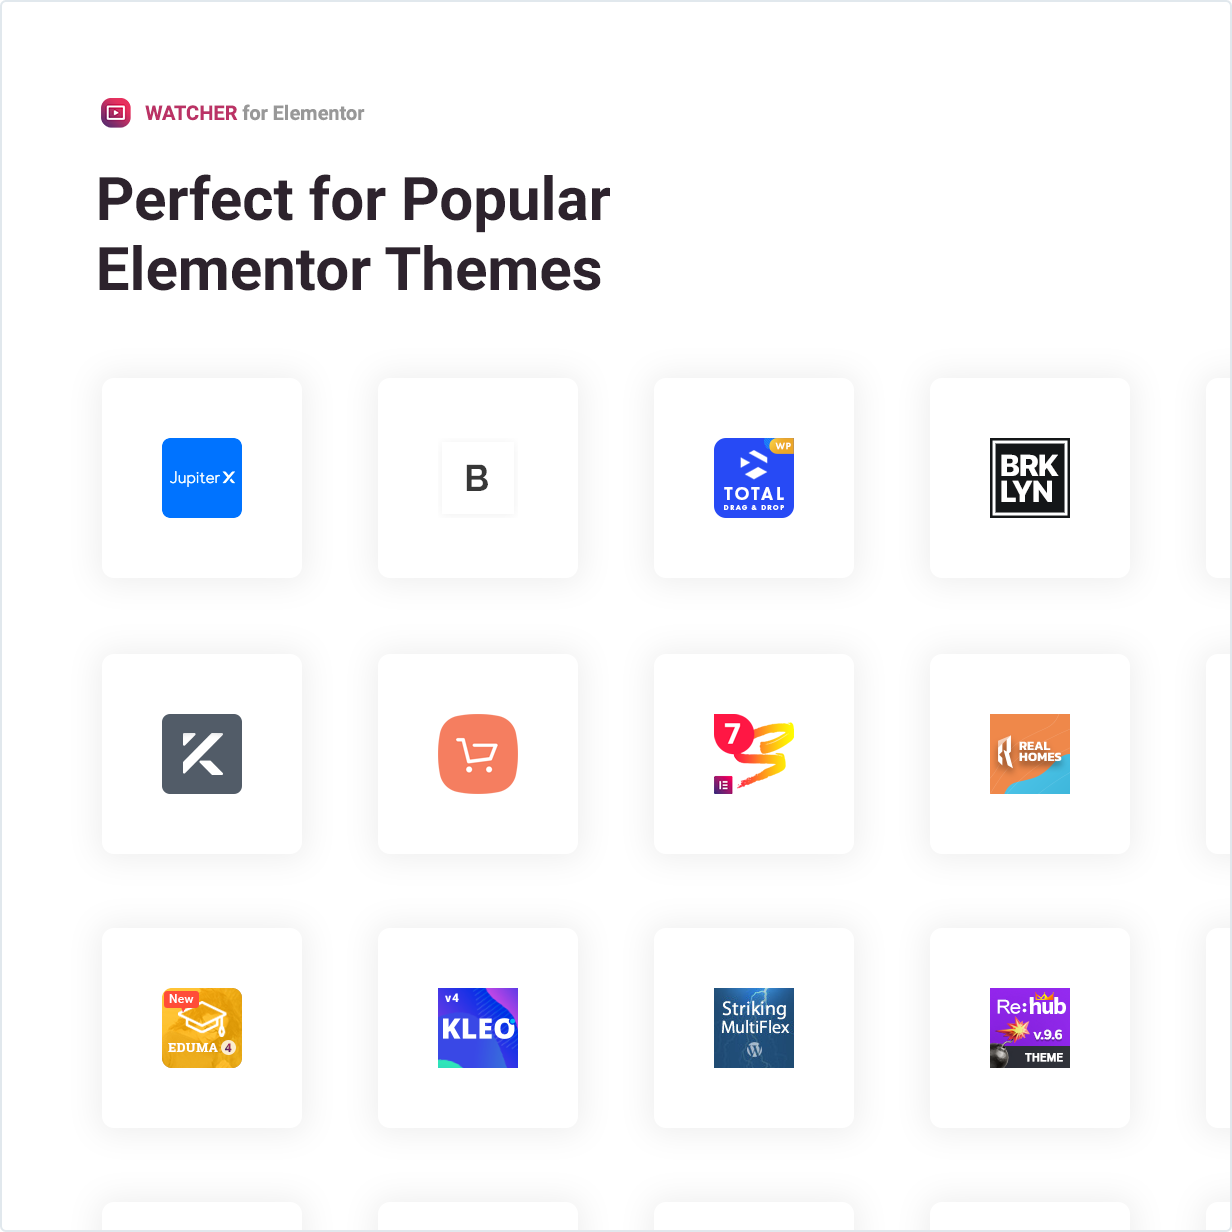 Perfect for Popular Elementor Themes